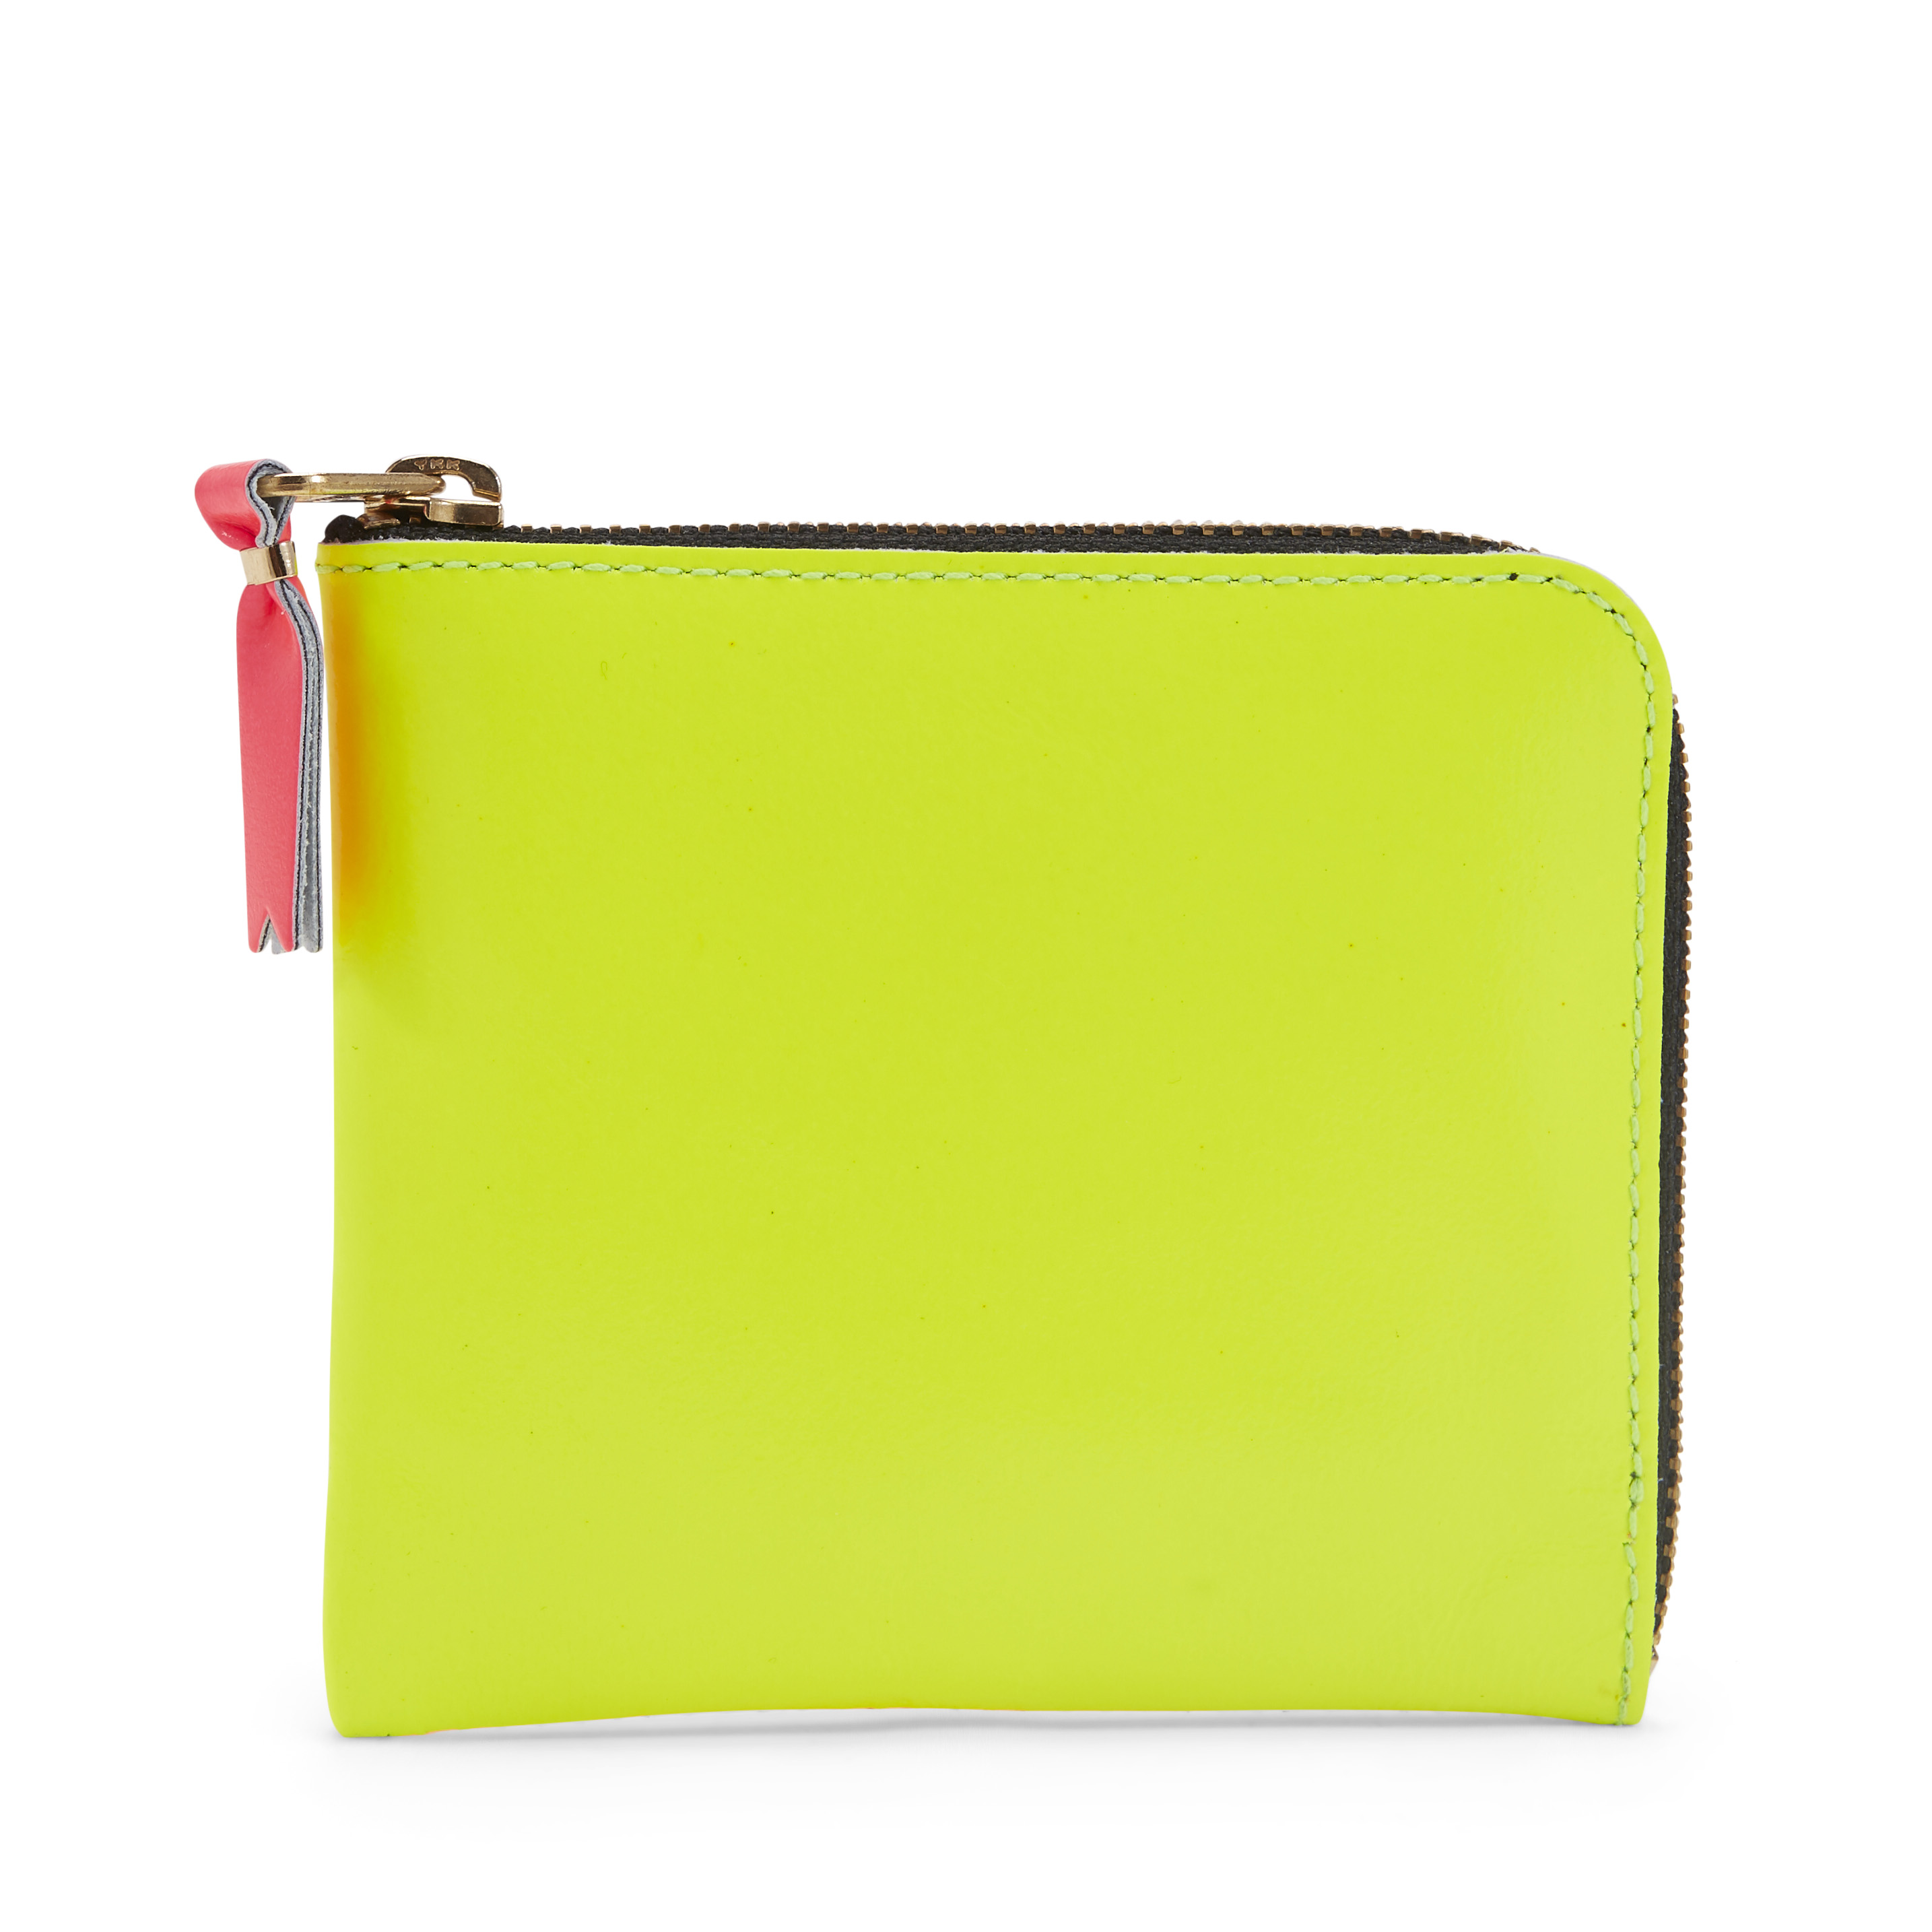 Comme des Garcons SA3100SF New Super Fluo Wallet Yellow in Leather